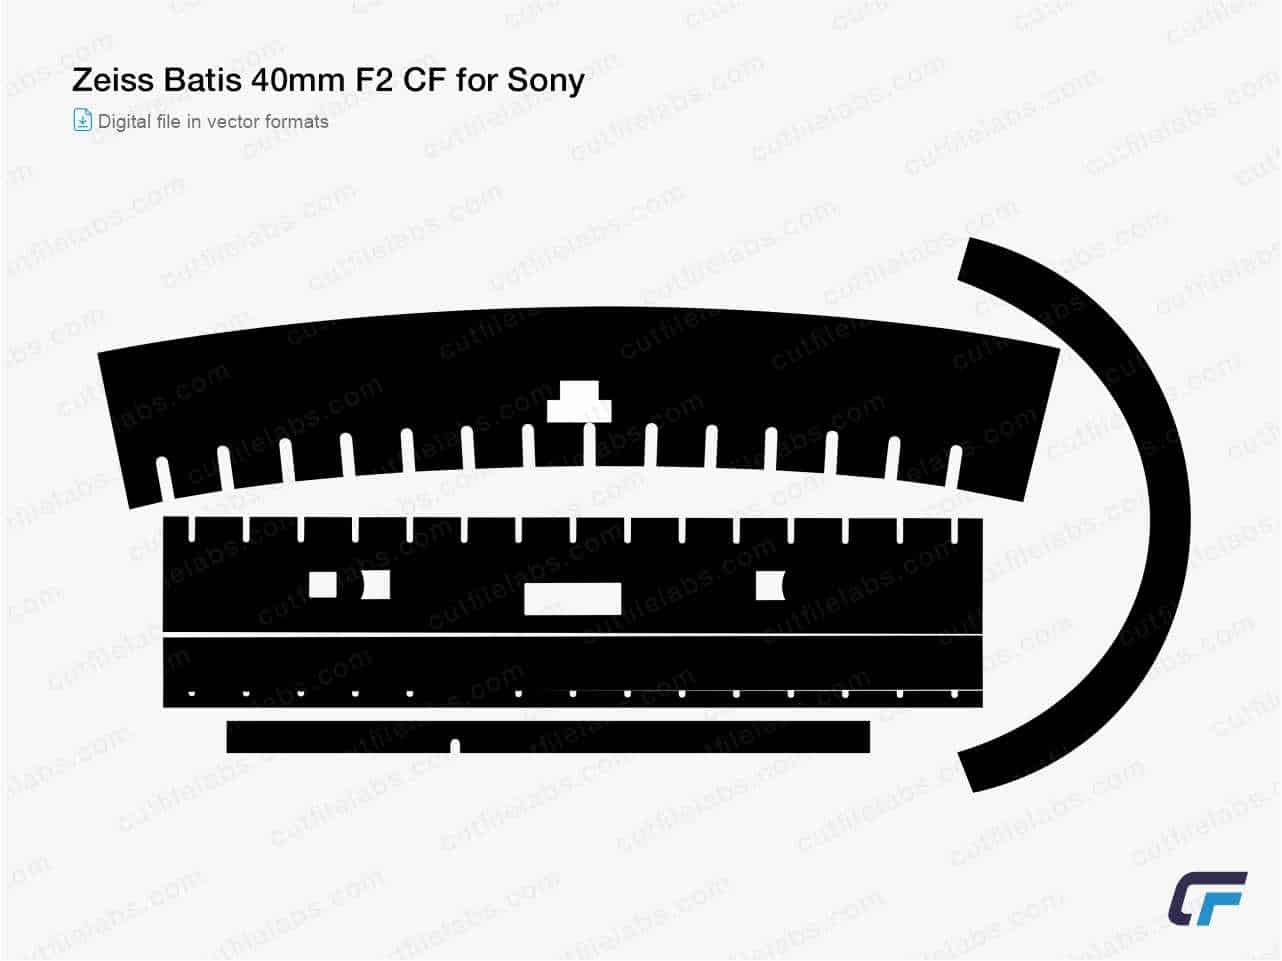 Zeiss Batis 40mm F2 CF for Sony (2018) Cut File Template